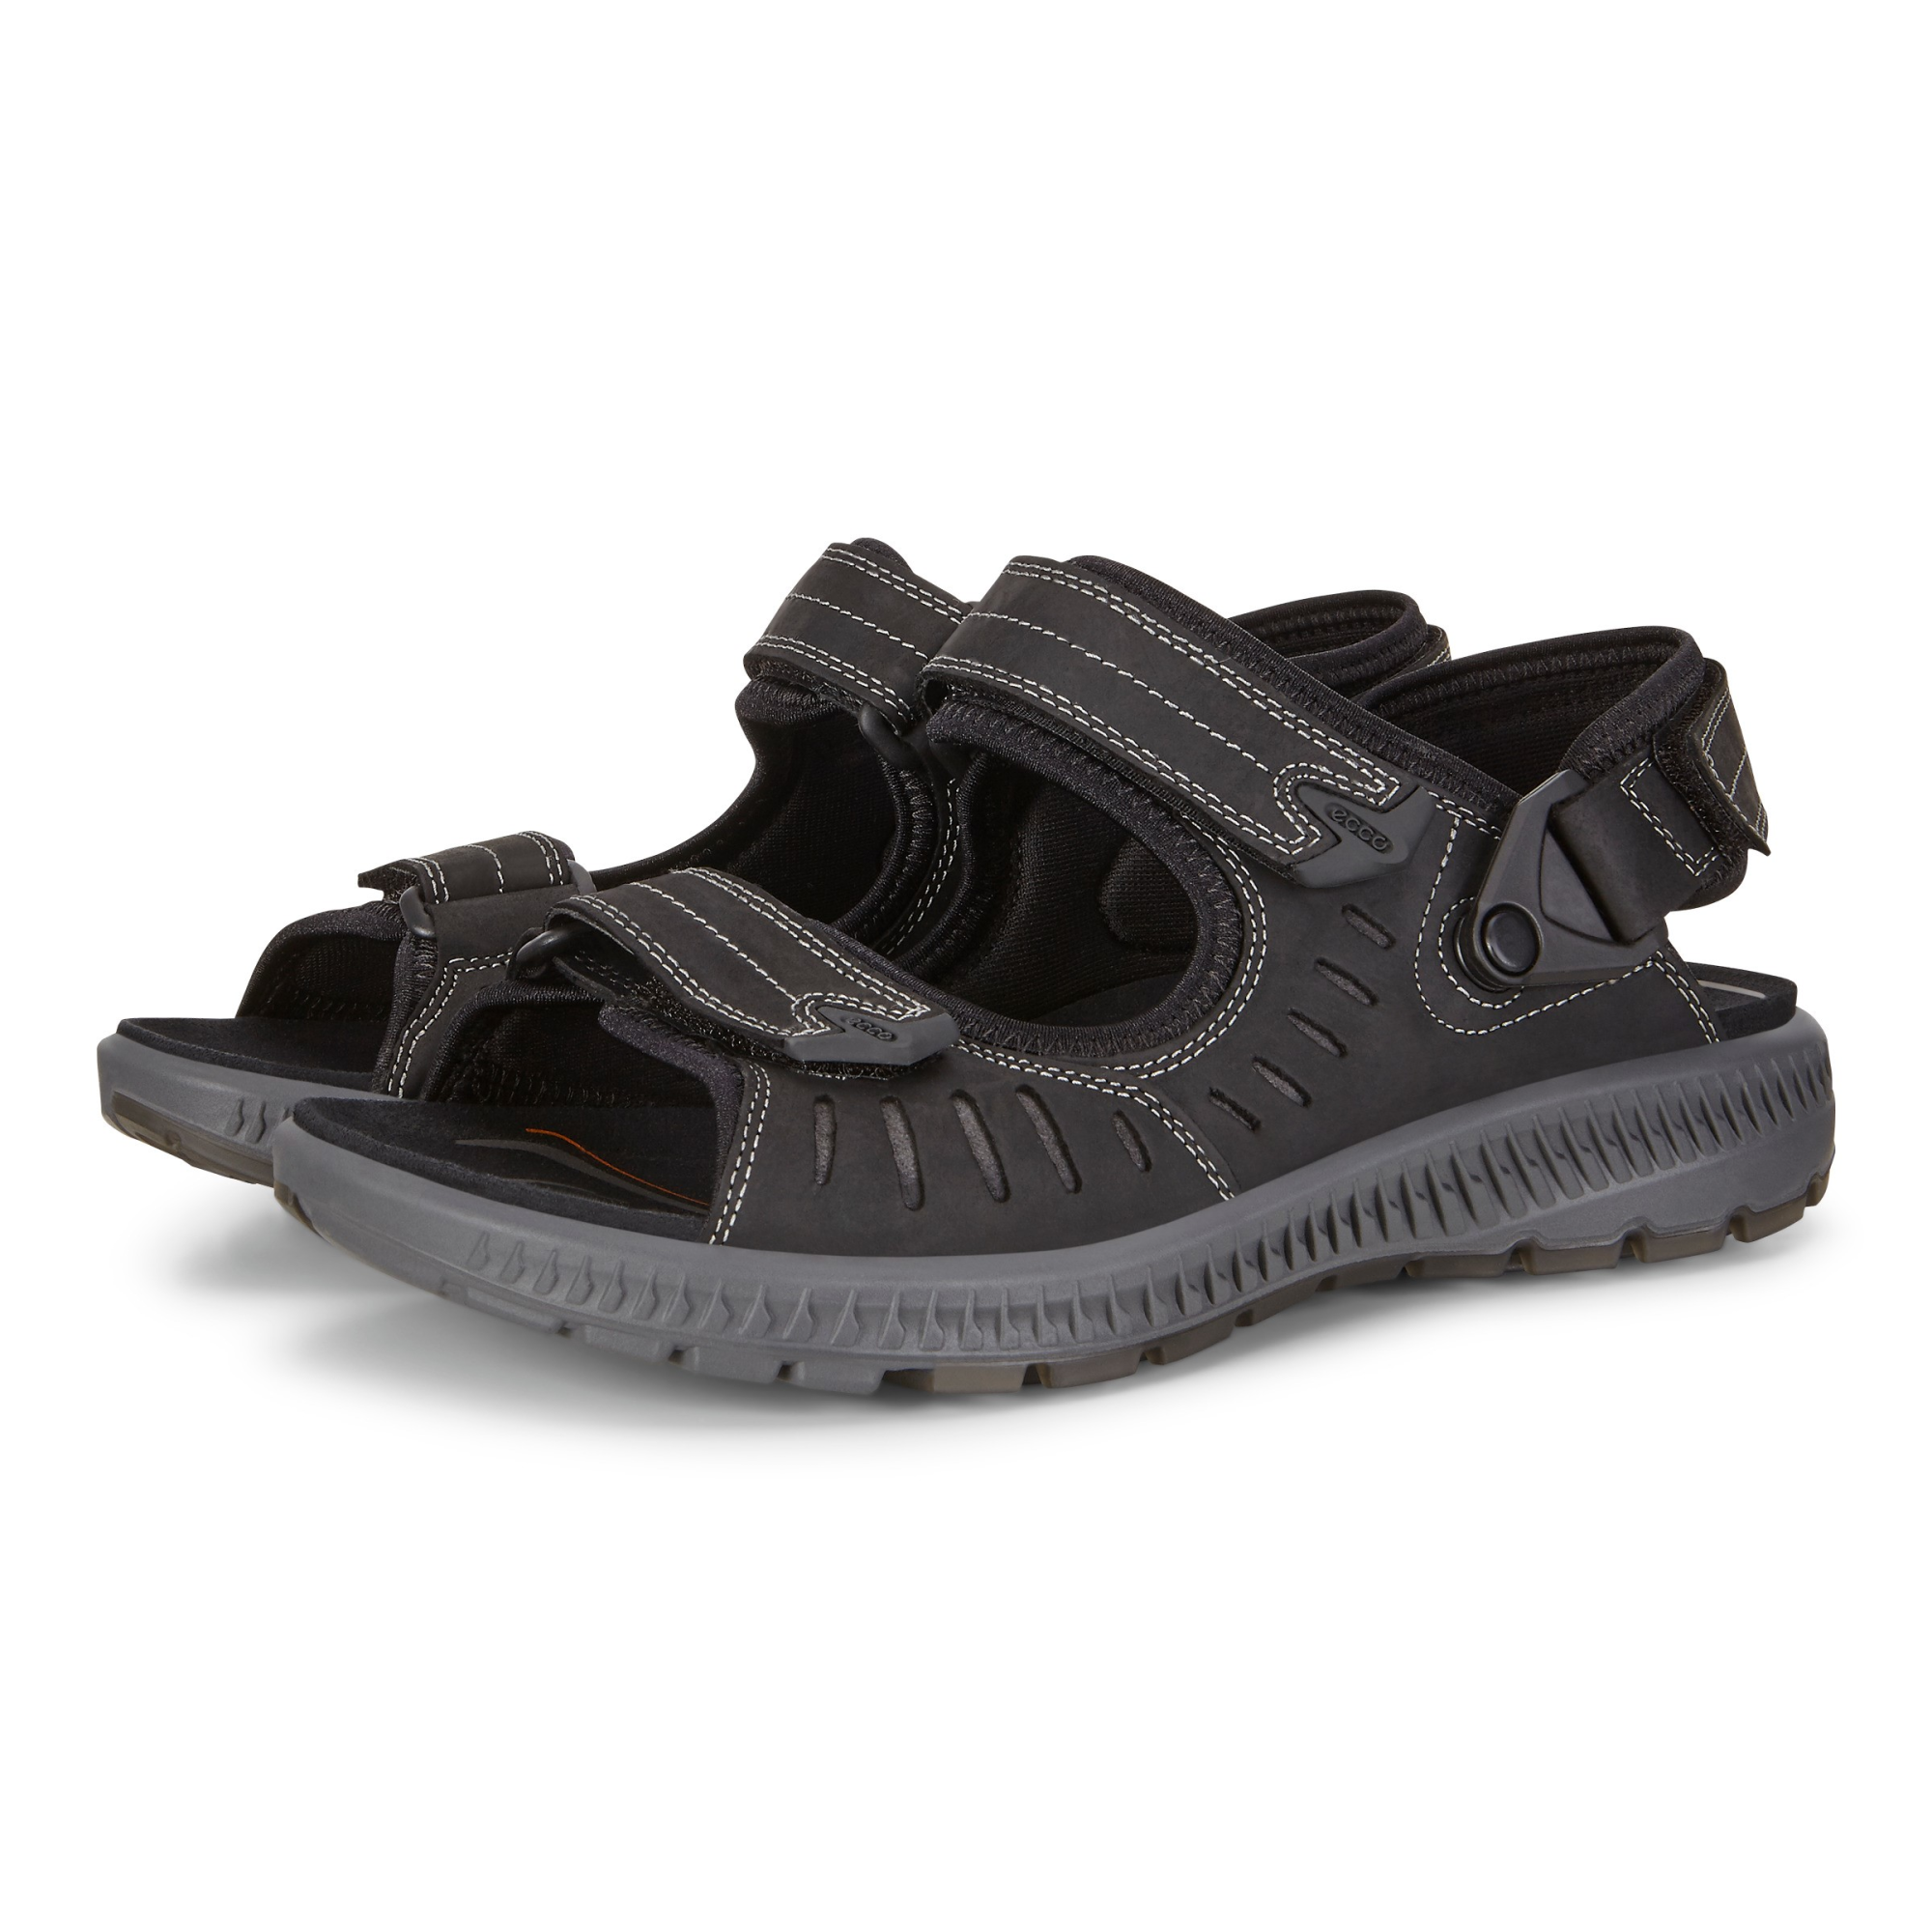 Hængsel privat gevinst Ecco Mens Terra 2S Sandal 43 - Products - Veryk Mall - Veryk Mall, many  product, quick response, safe your money!